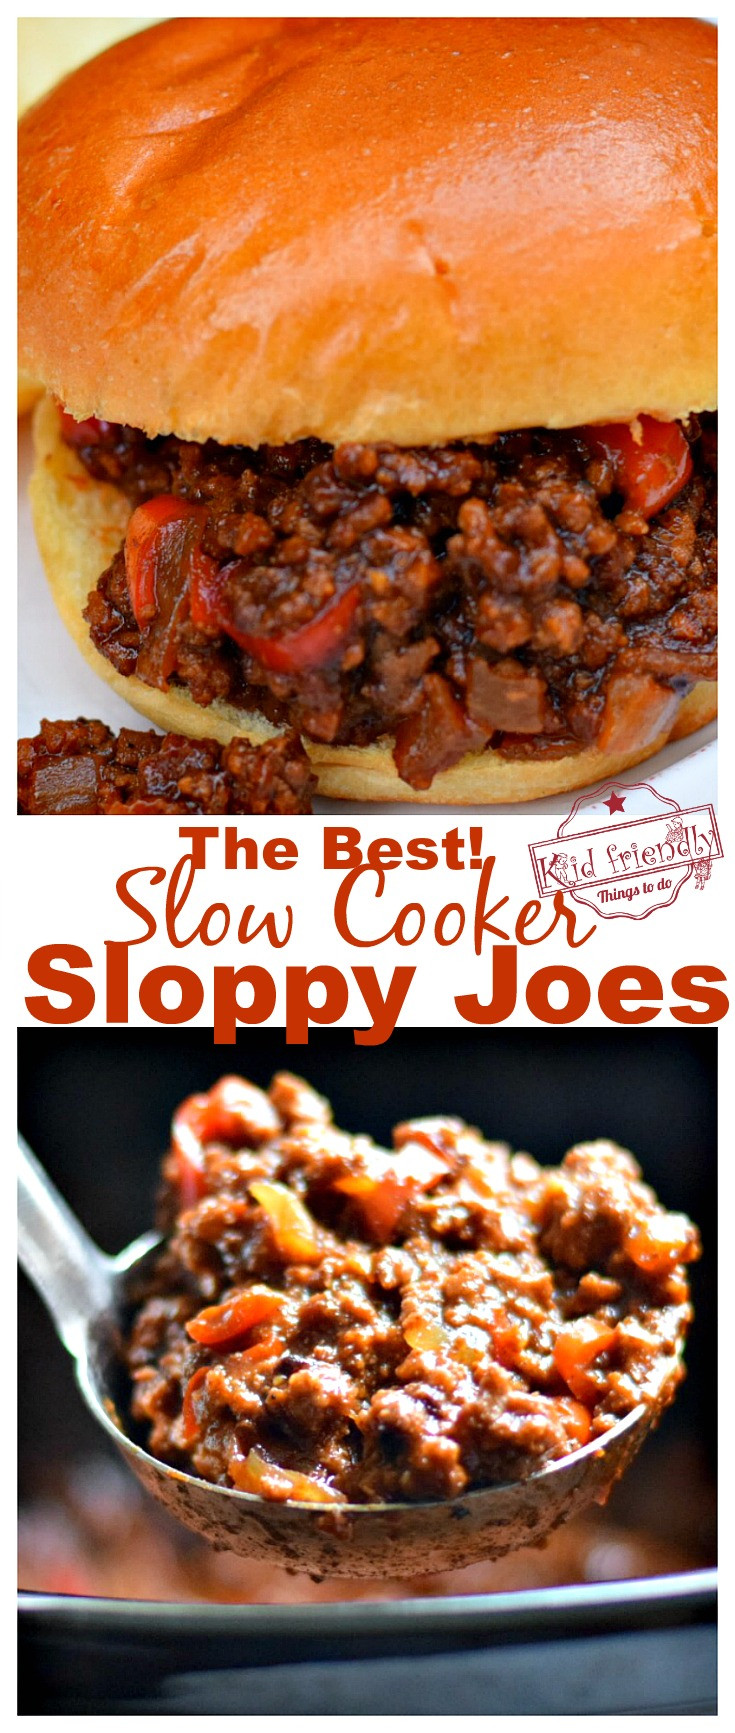 Slow Cooker Sloppy Joes
 The Best Slow Cooker Sloppy Joes I ve Ever Had Recipe